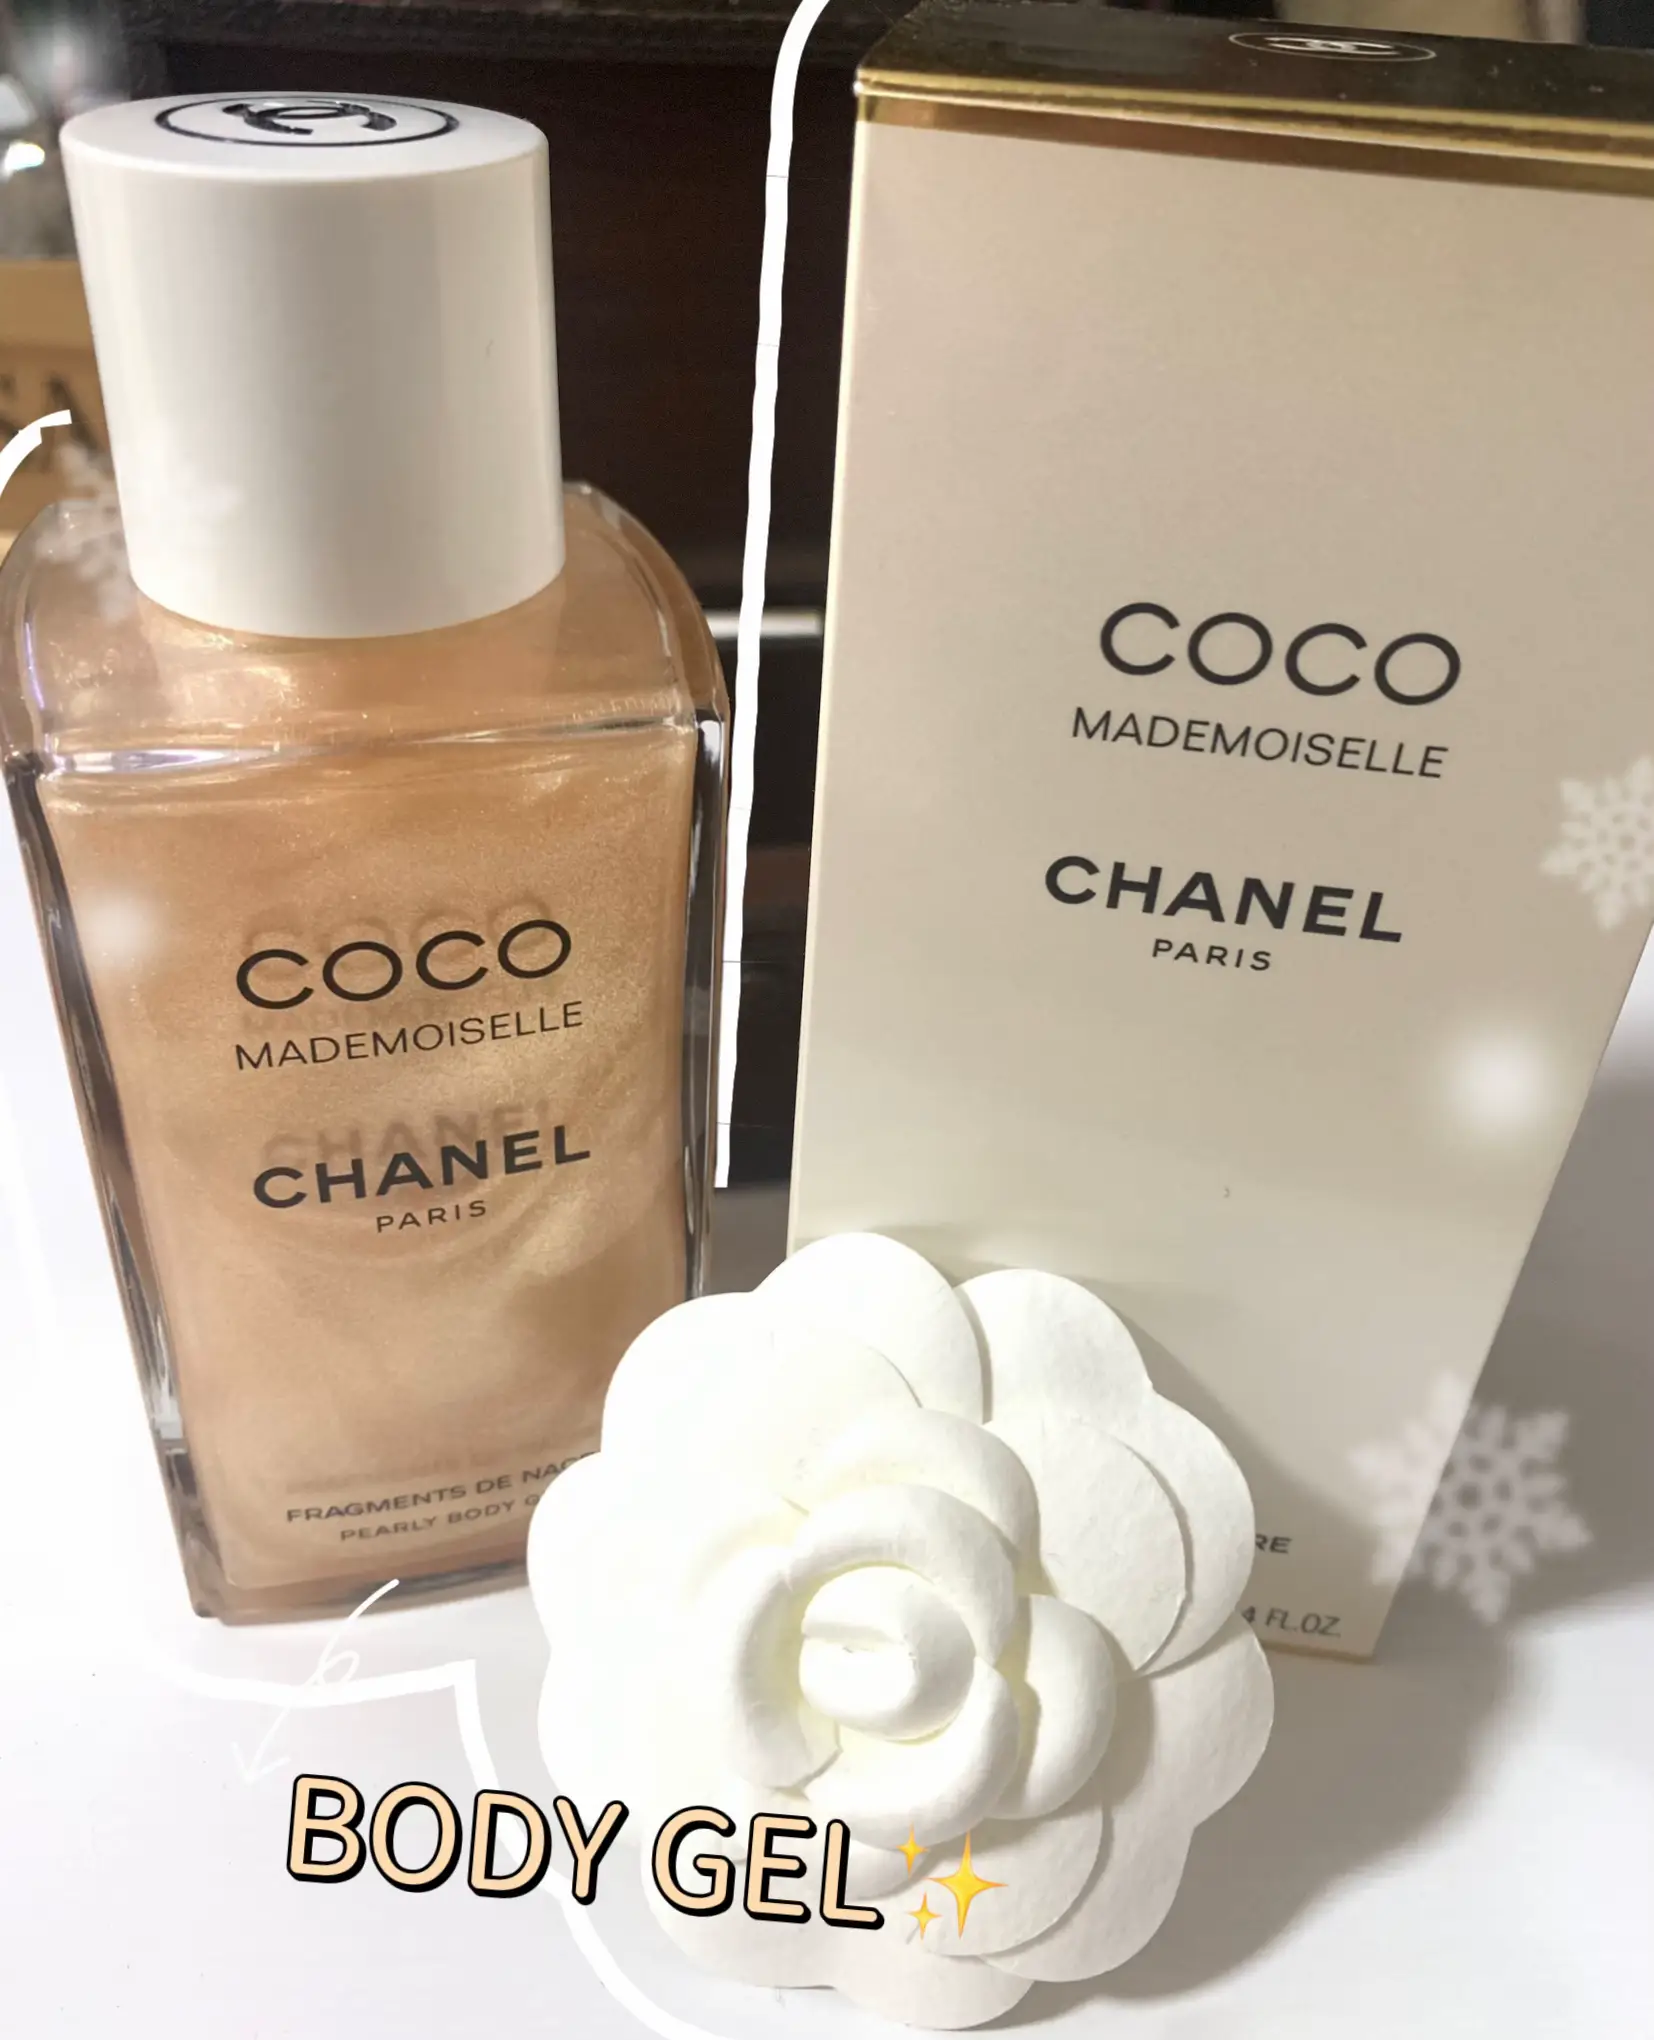 Turn around perfume ♡ CHANEL BODY GEL✨, Gallery posted by marin